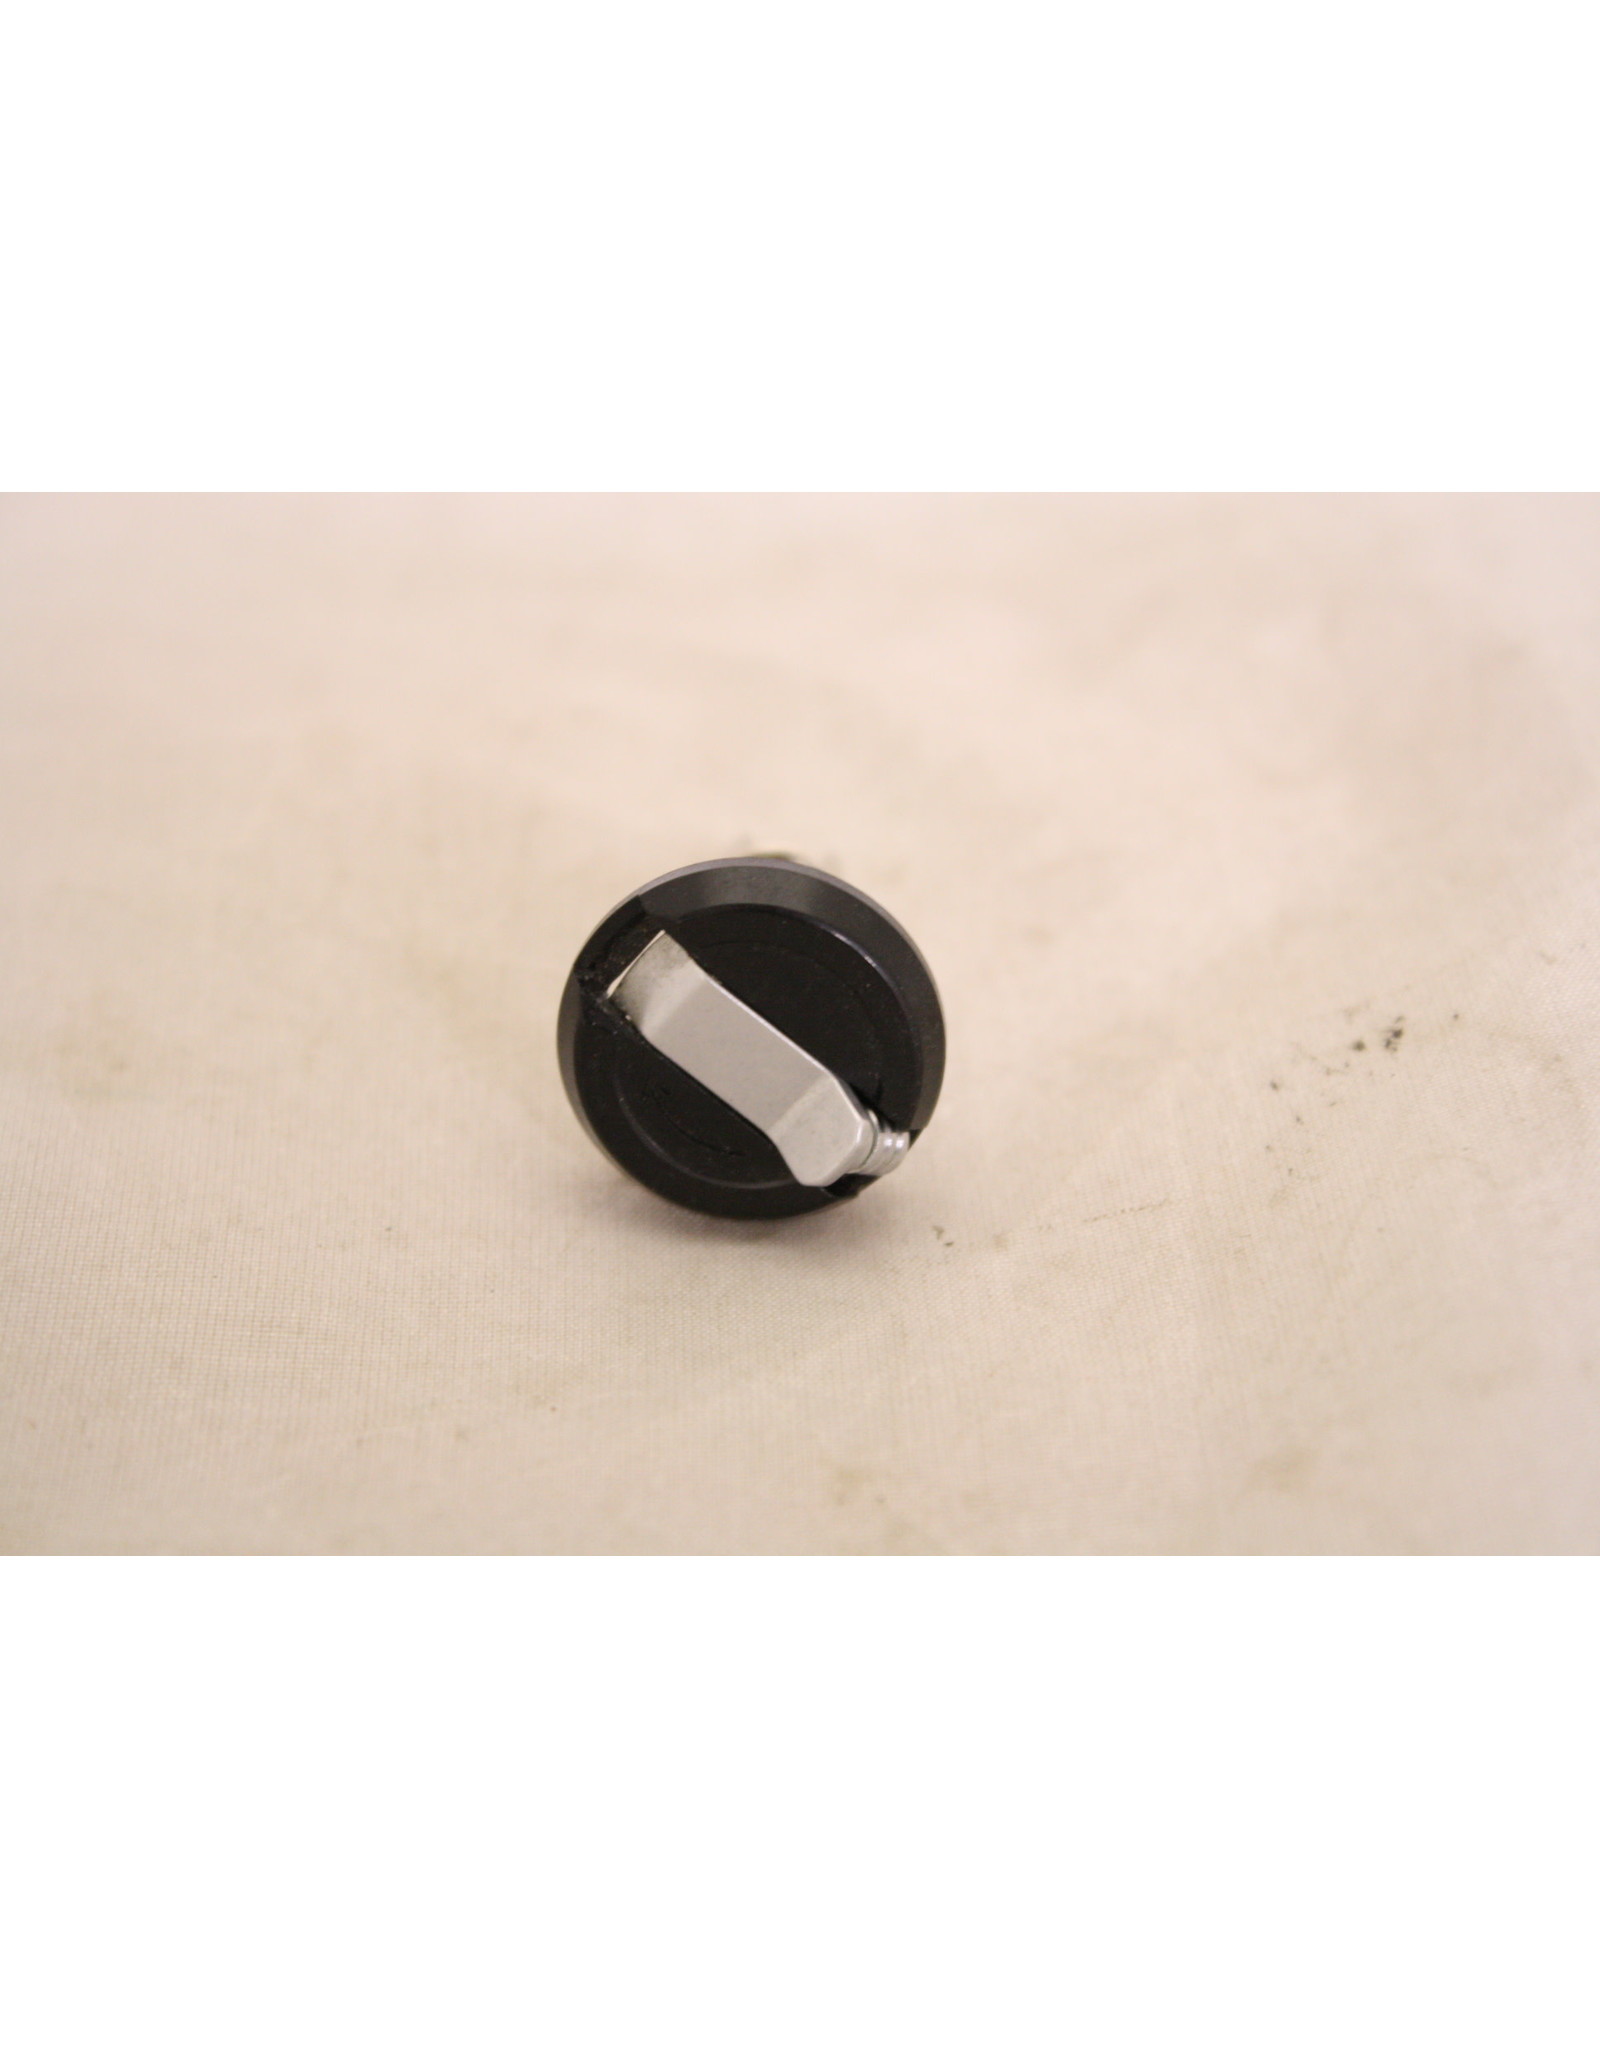 Rewind Knob Assembly for Pentax ME/MG/ME Super